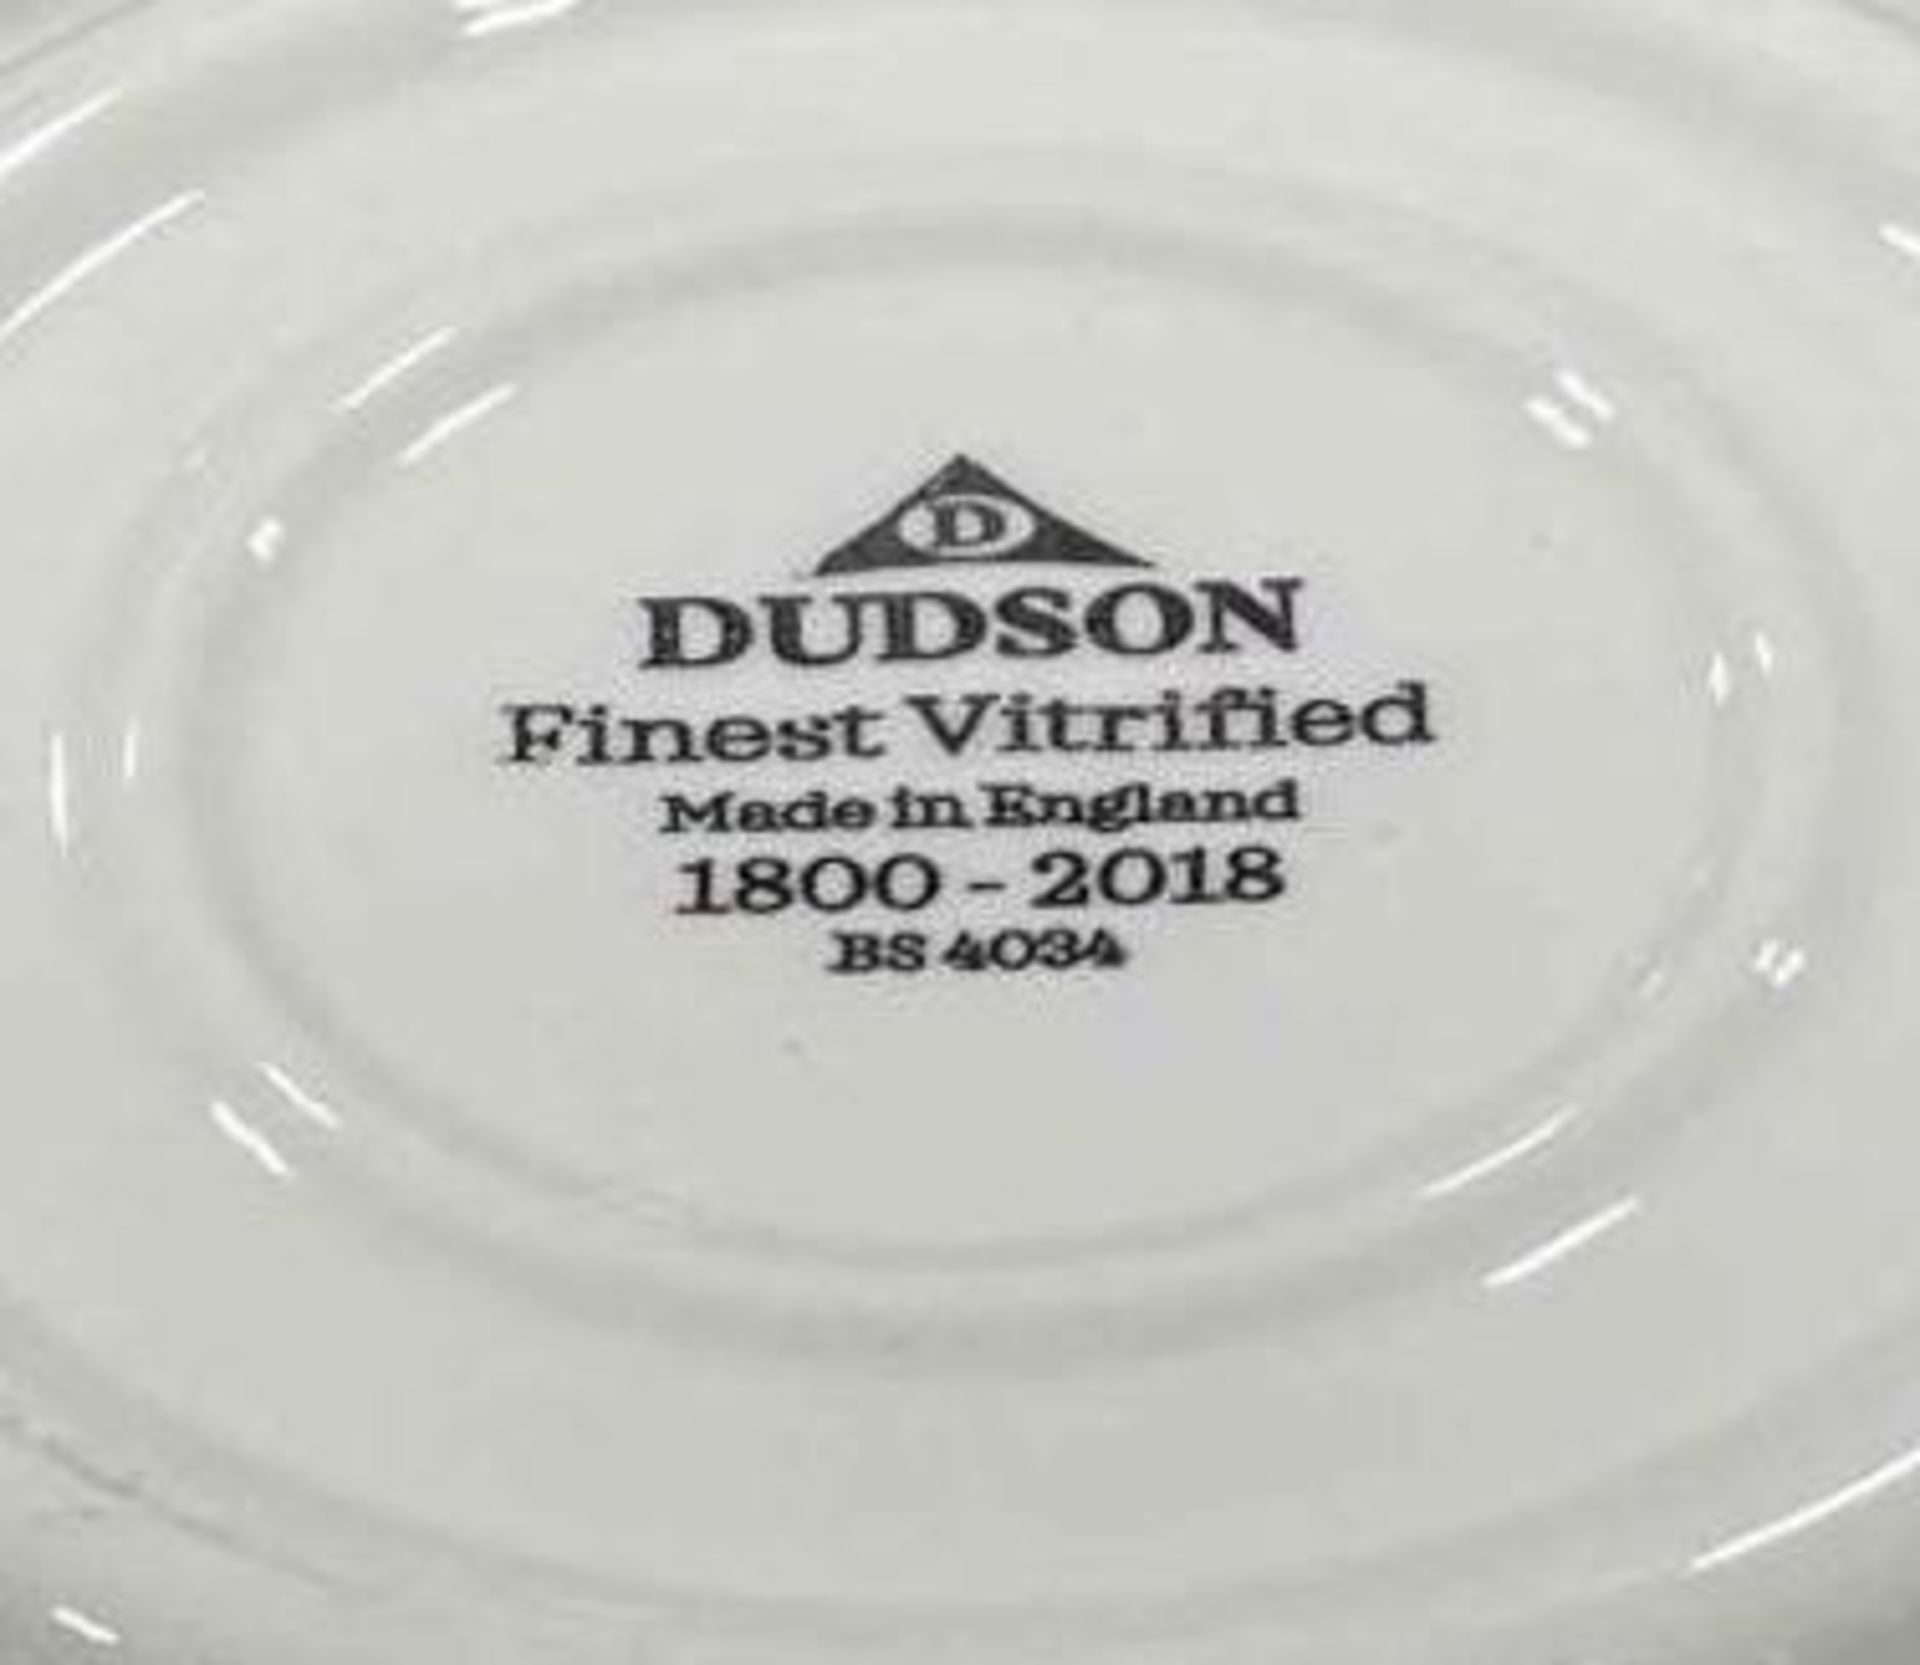 2 CASES OF DUDSON MOSAIC GREY 8" CHEF BOWL, 12/CASE - MADE IN ENGLAND - Image 4 of 4